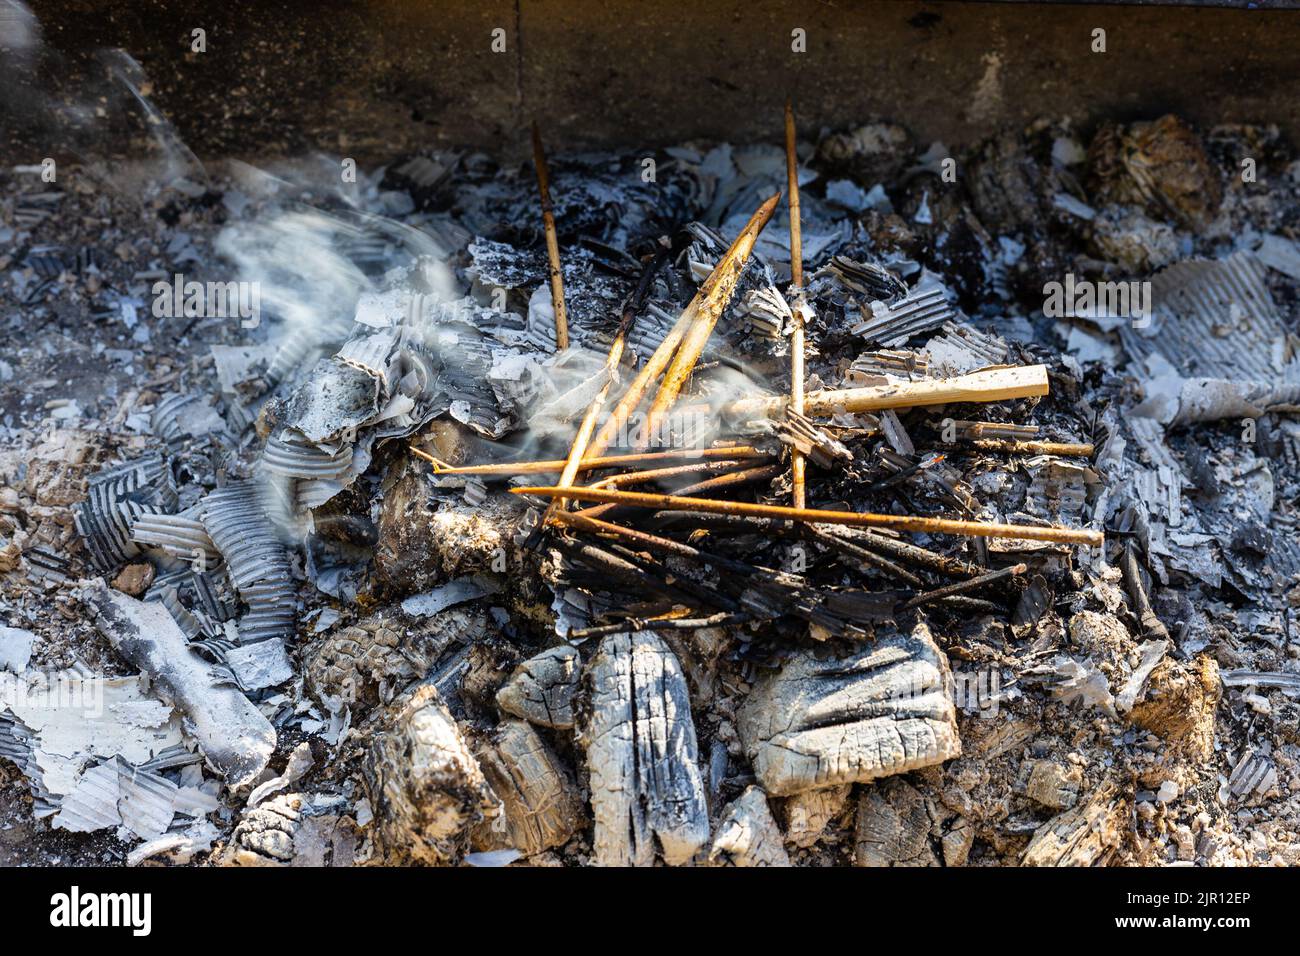 wood chips and twigs for lighting fire inside brazier close up Stock Photo